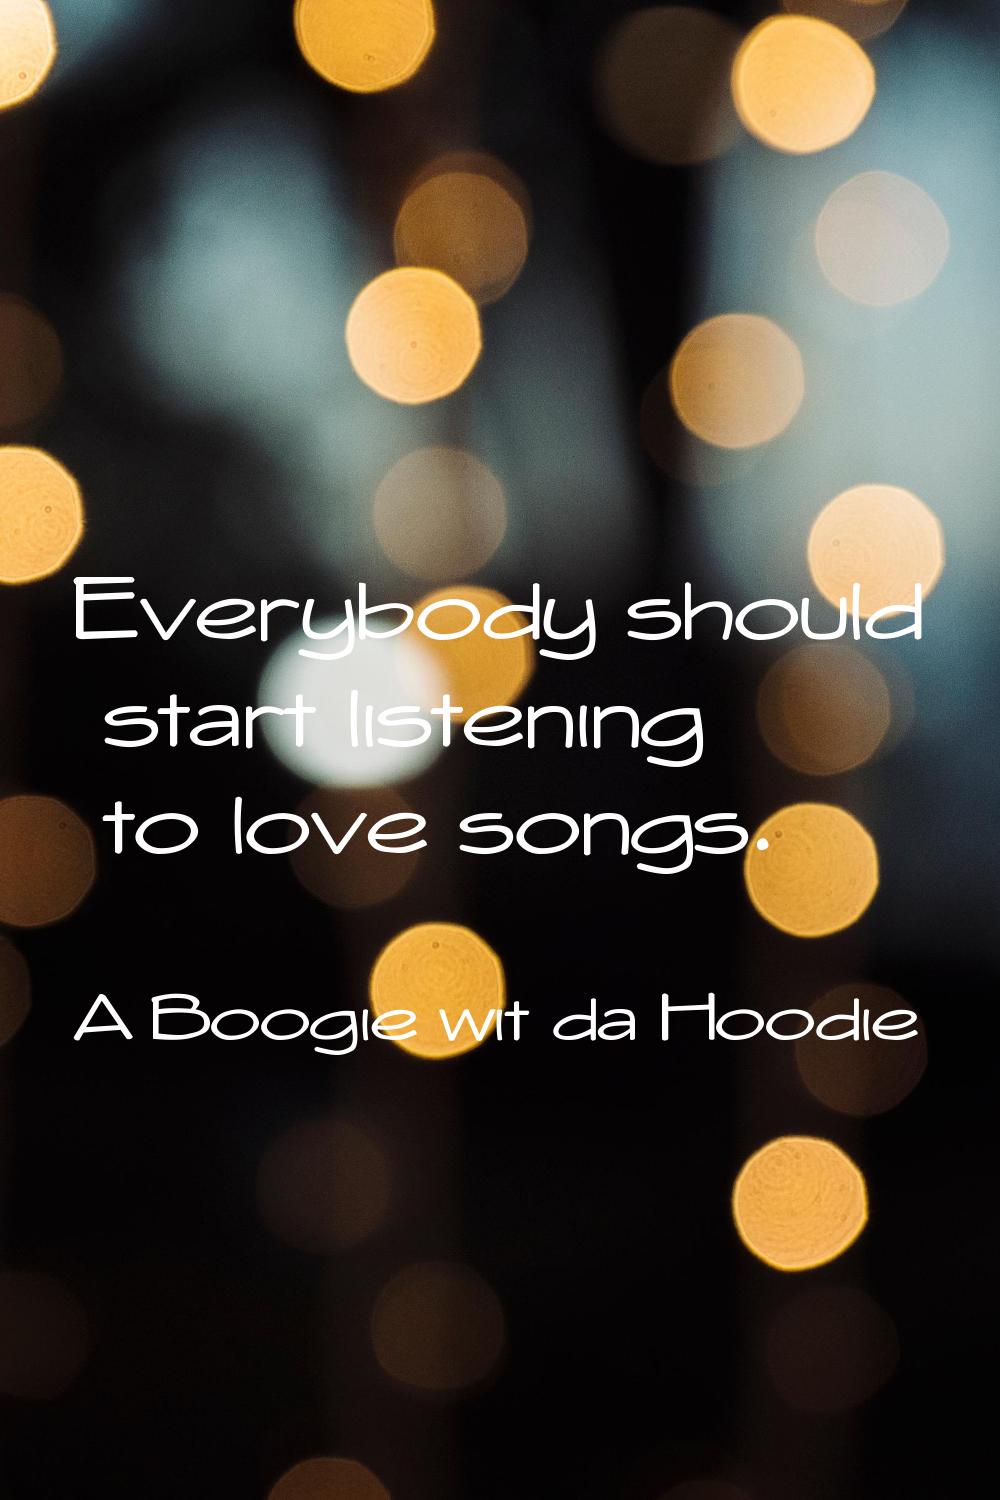 Everybody should start listening to love songs.